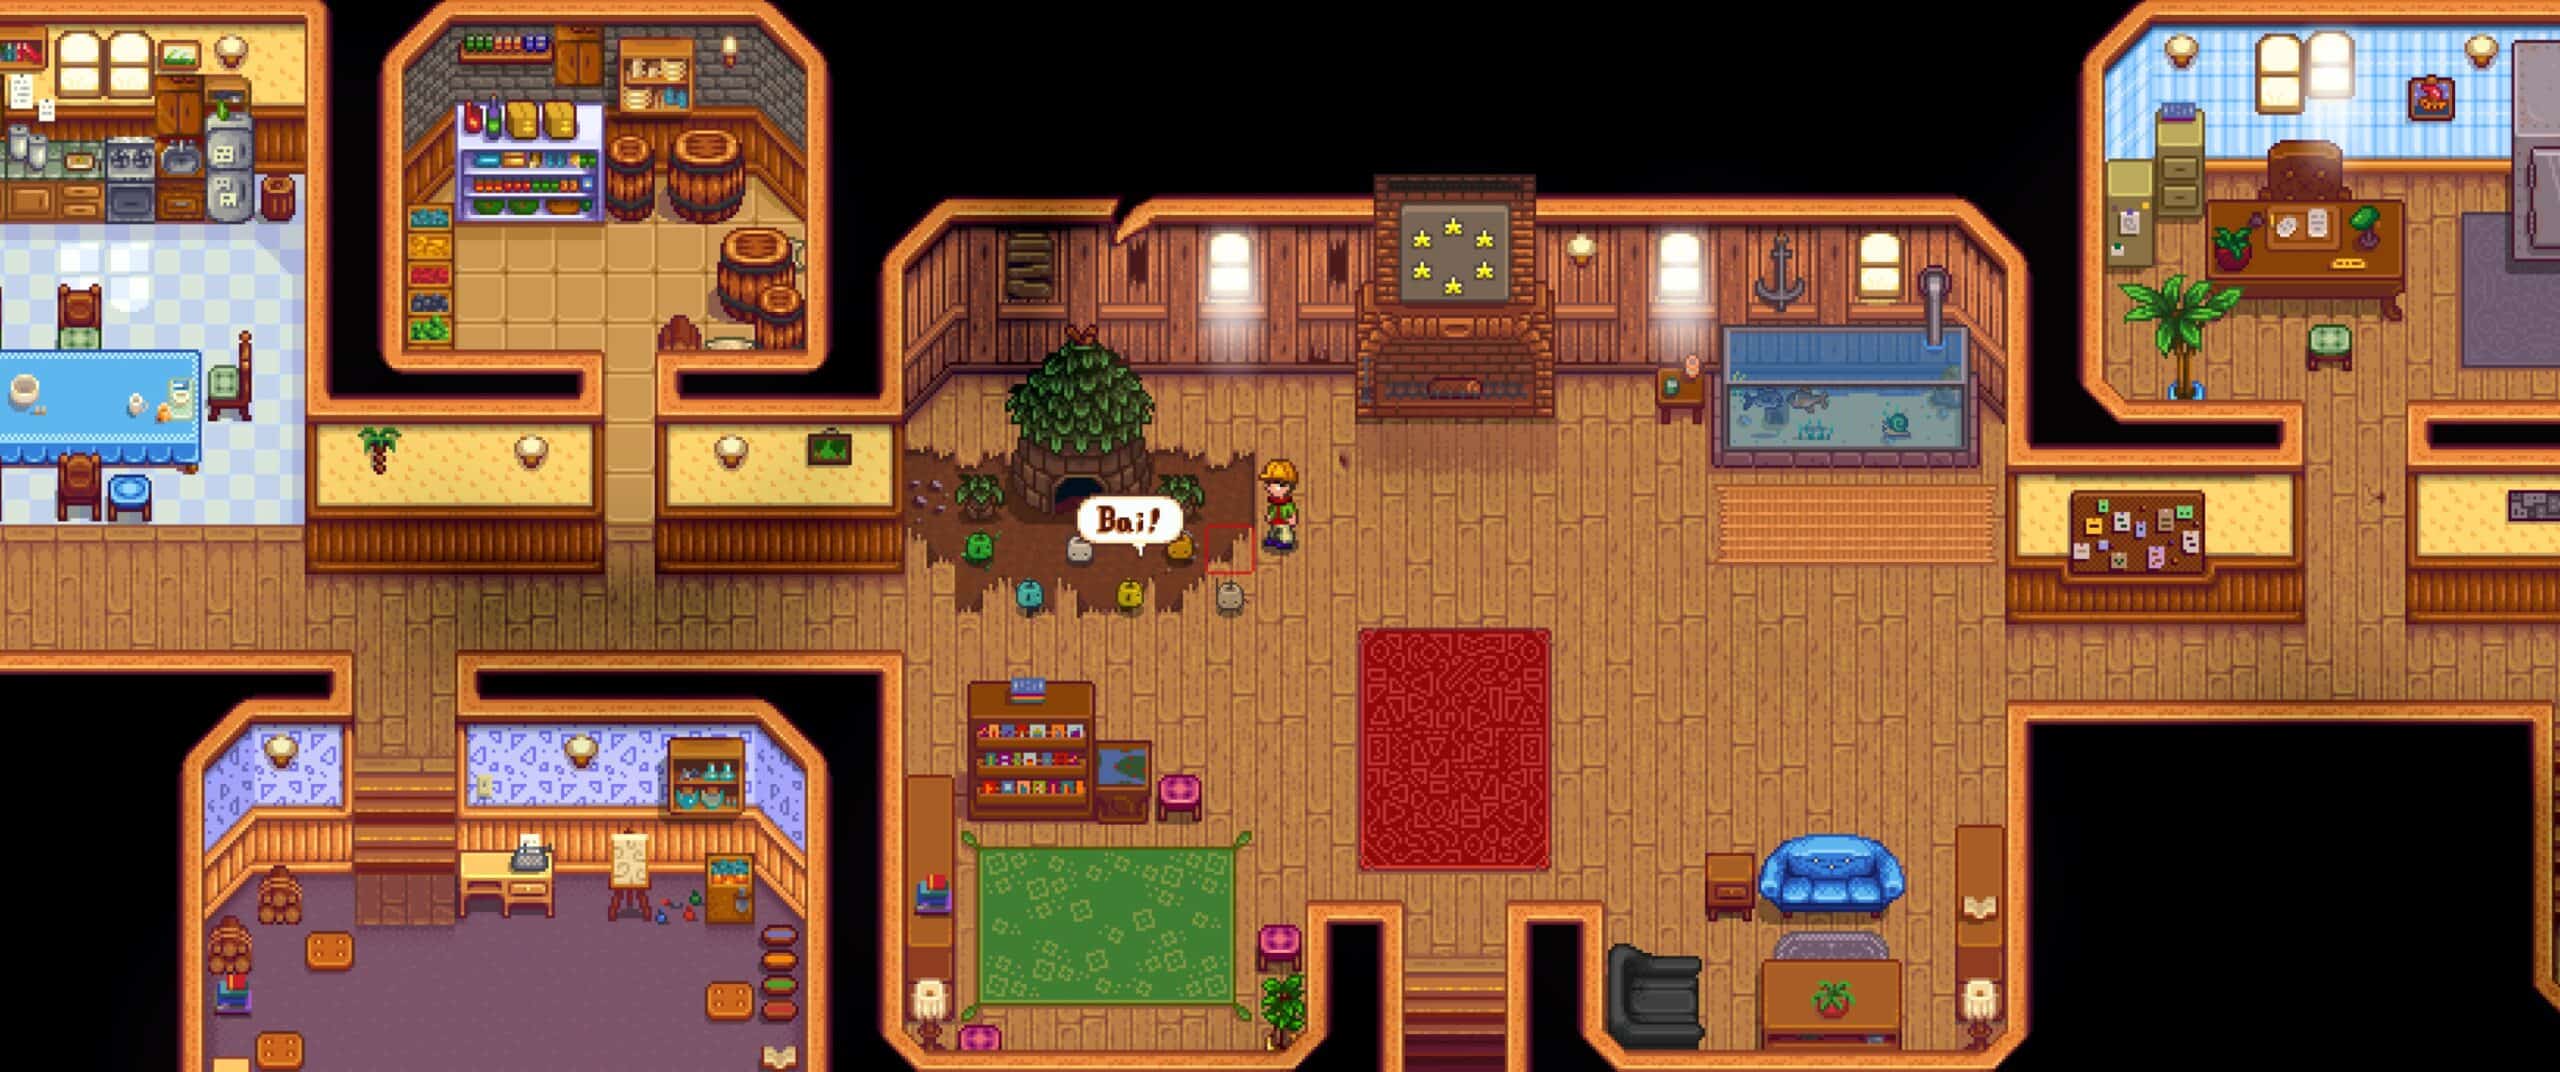 Image of Stardew Valley Community Center being completed.